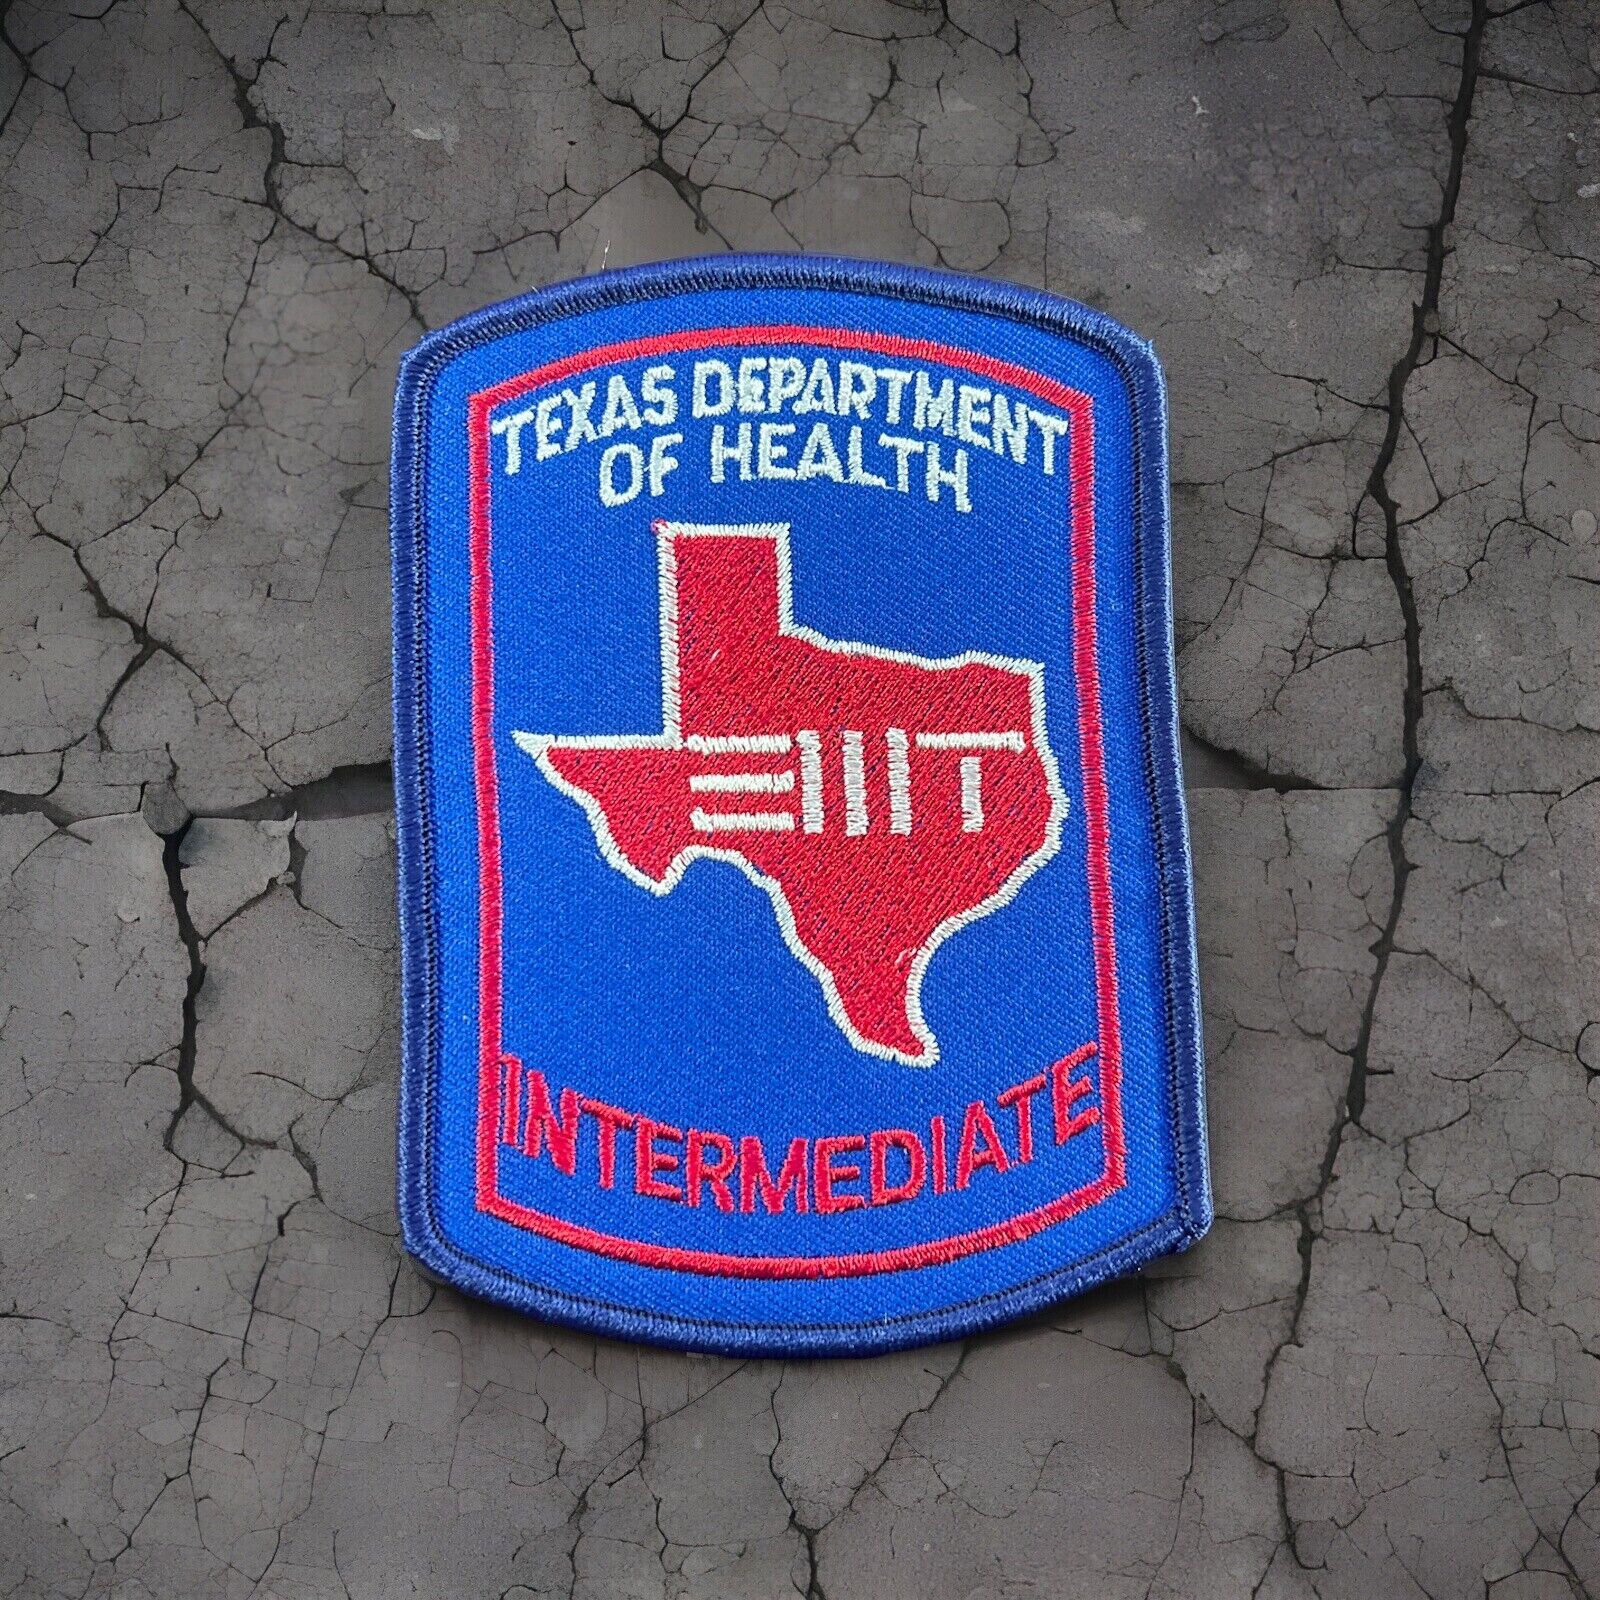 TX Texas State Department Of Health EMT Intermediate patch